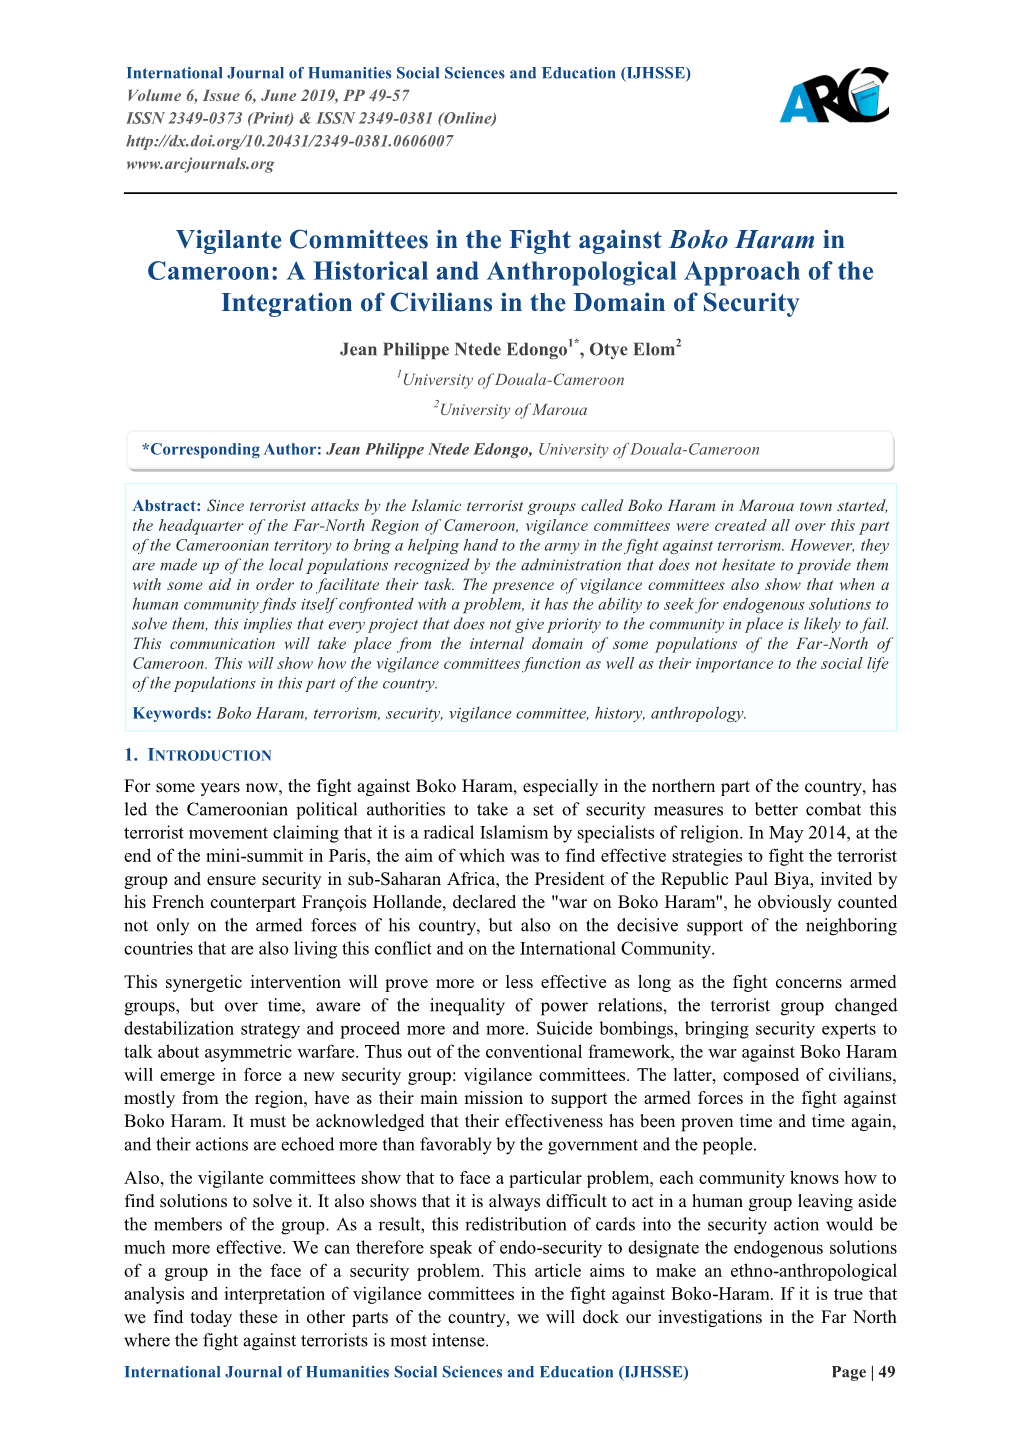 Vigilante Committees in the Fight Against Boko Haram in Cameroon: a Historical and Anthropological Approach of the Integration of Civilians in the Domain of Security